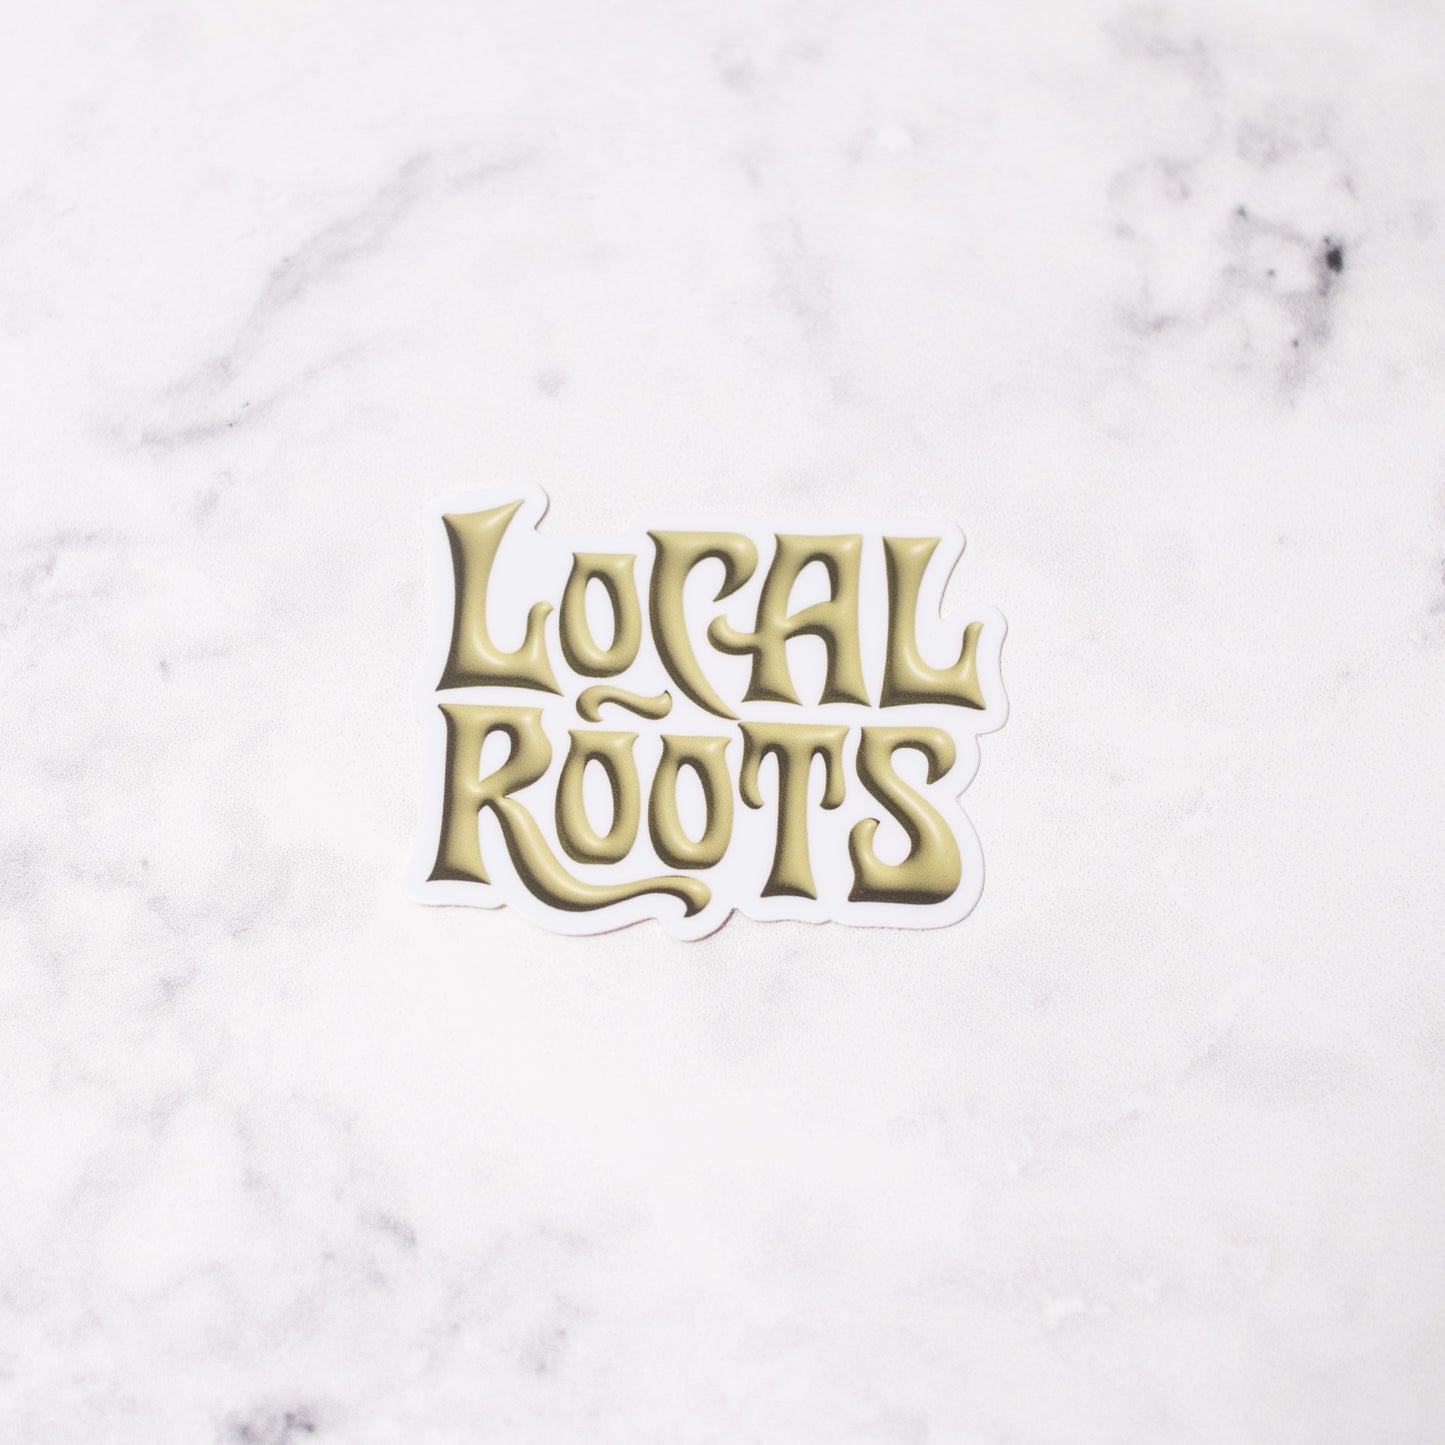 Local Roots Sticker